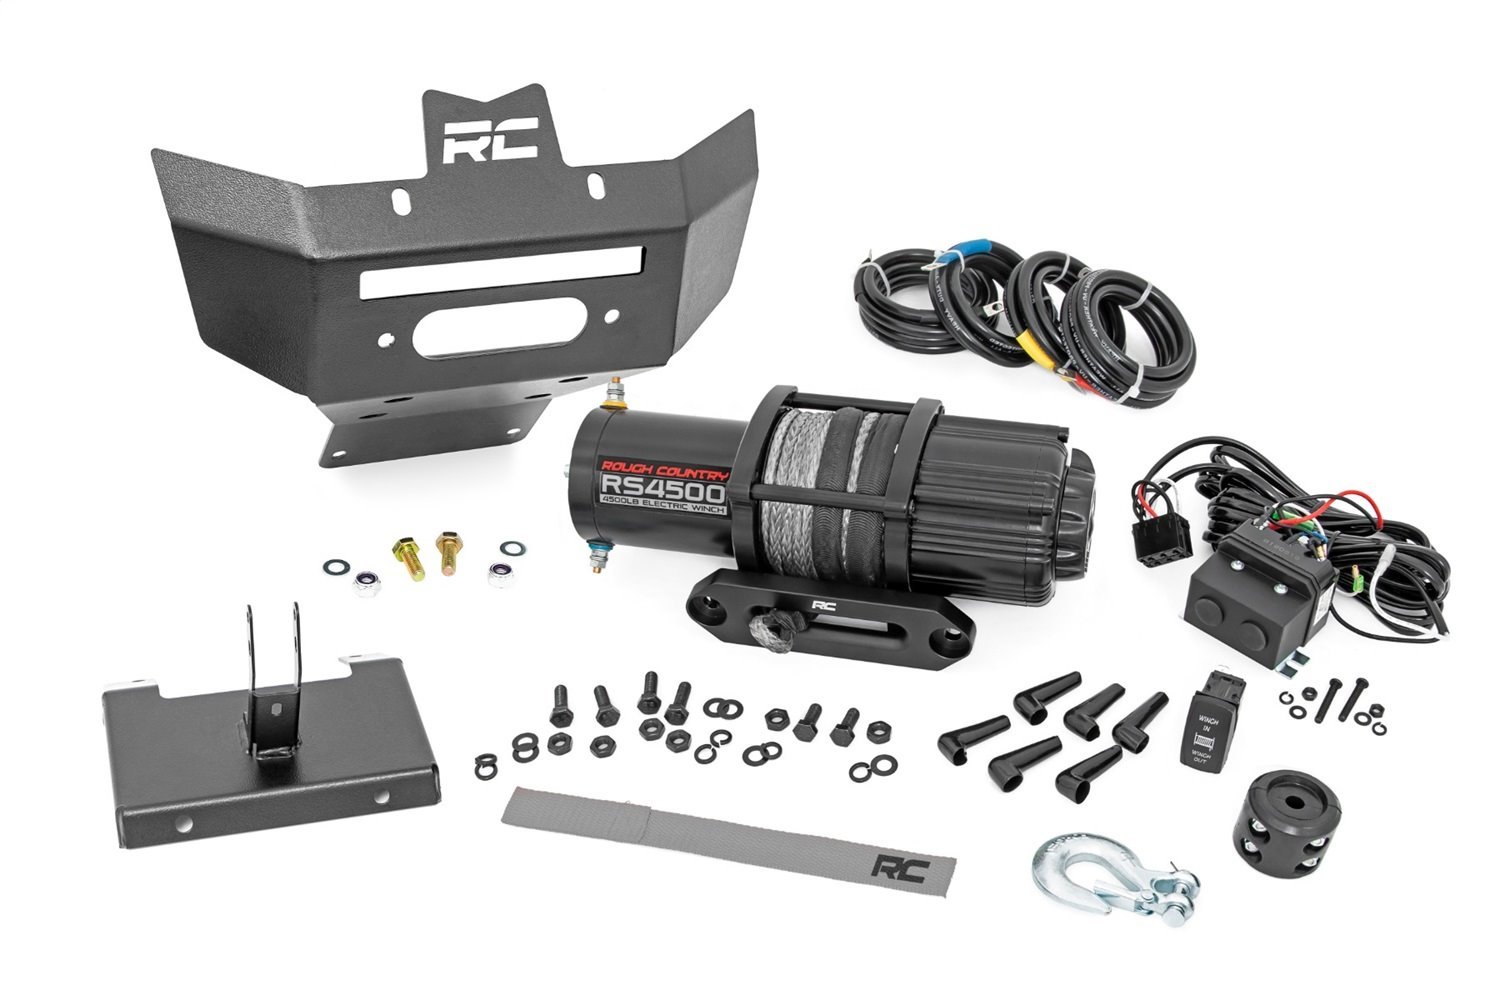 97070 Winch Bumper, 4500-Lb Winch, Synthetic Rope, Can-Am Renegade 1000/Renegade 500 (12-22)